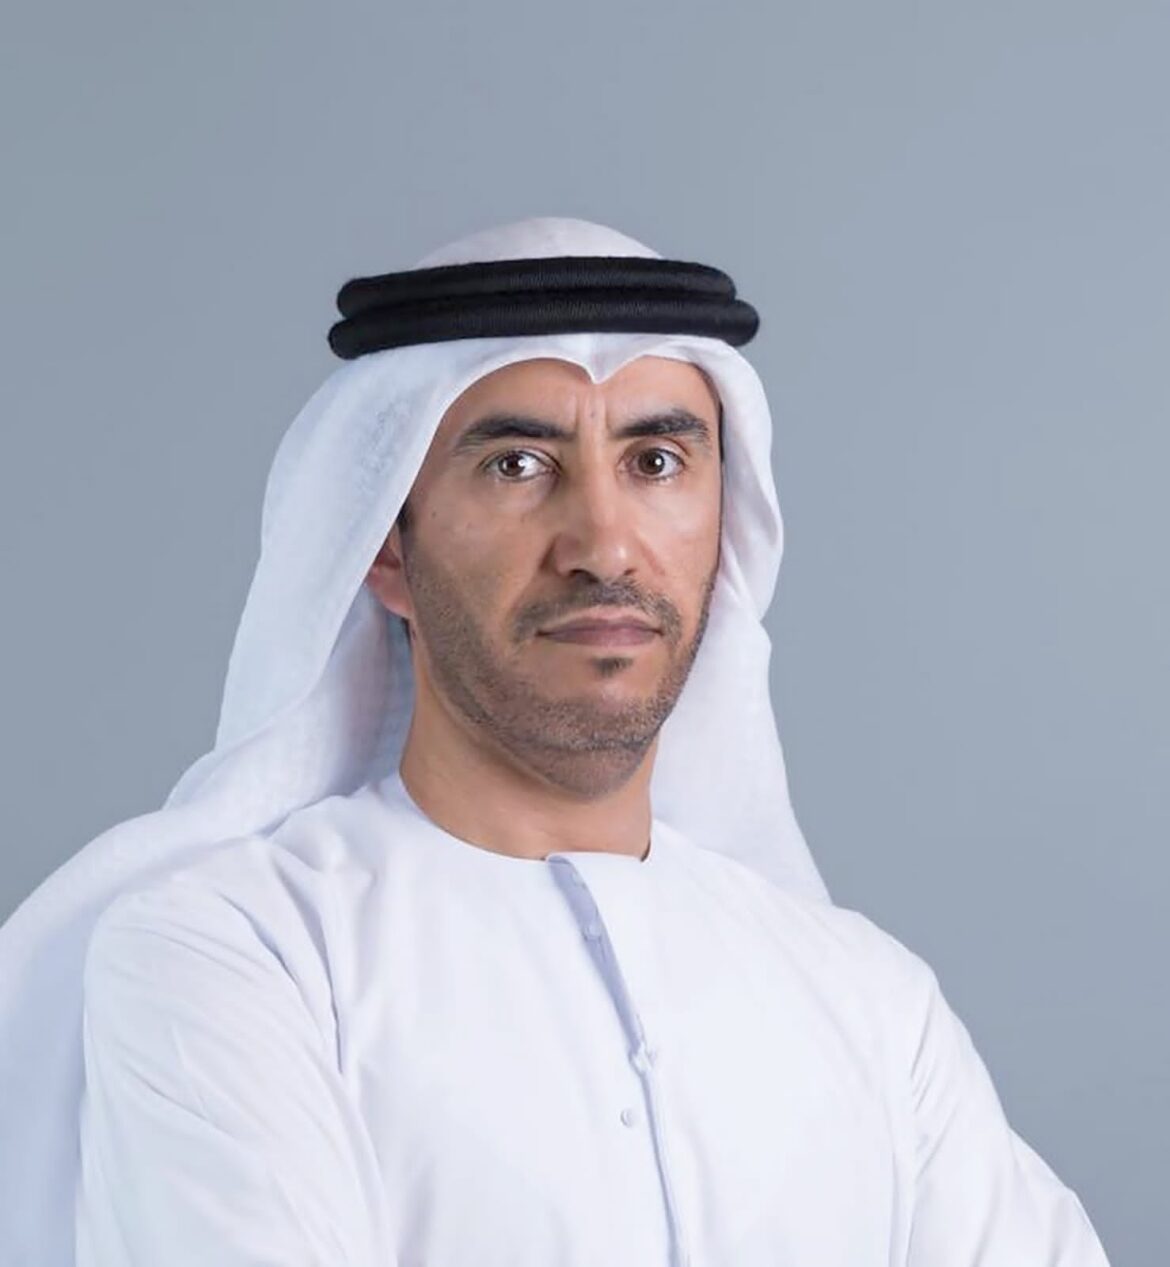 ADQ appoints new Chairman of Abu Dhabi Securities Exchange (ADX) and two new Board Directors